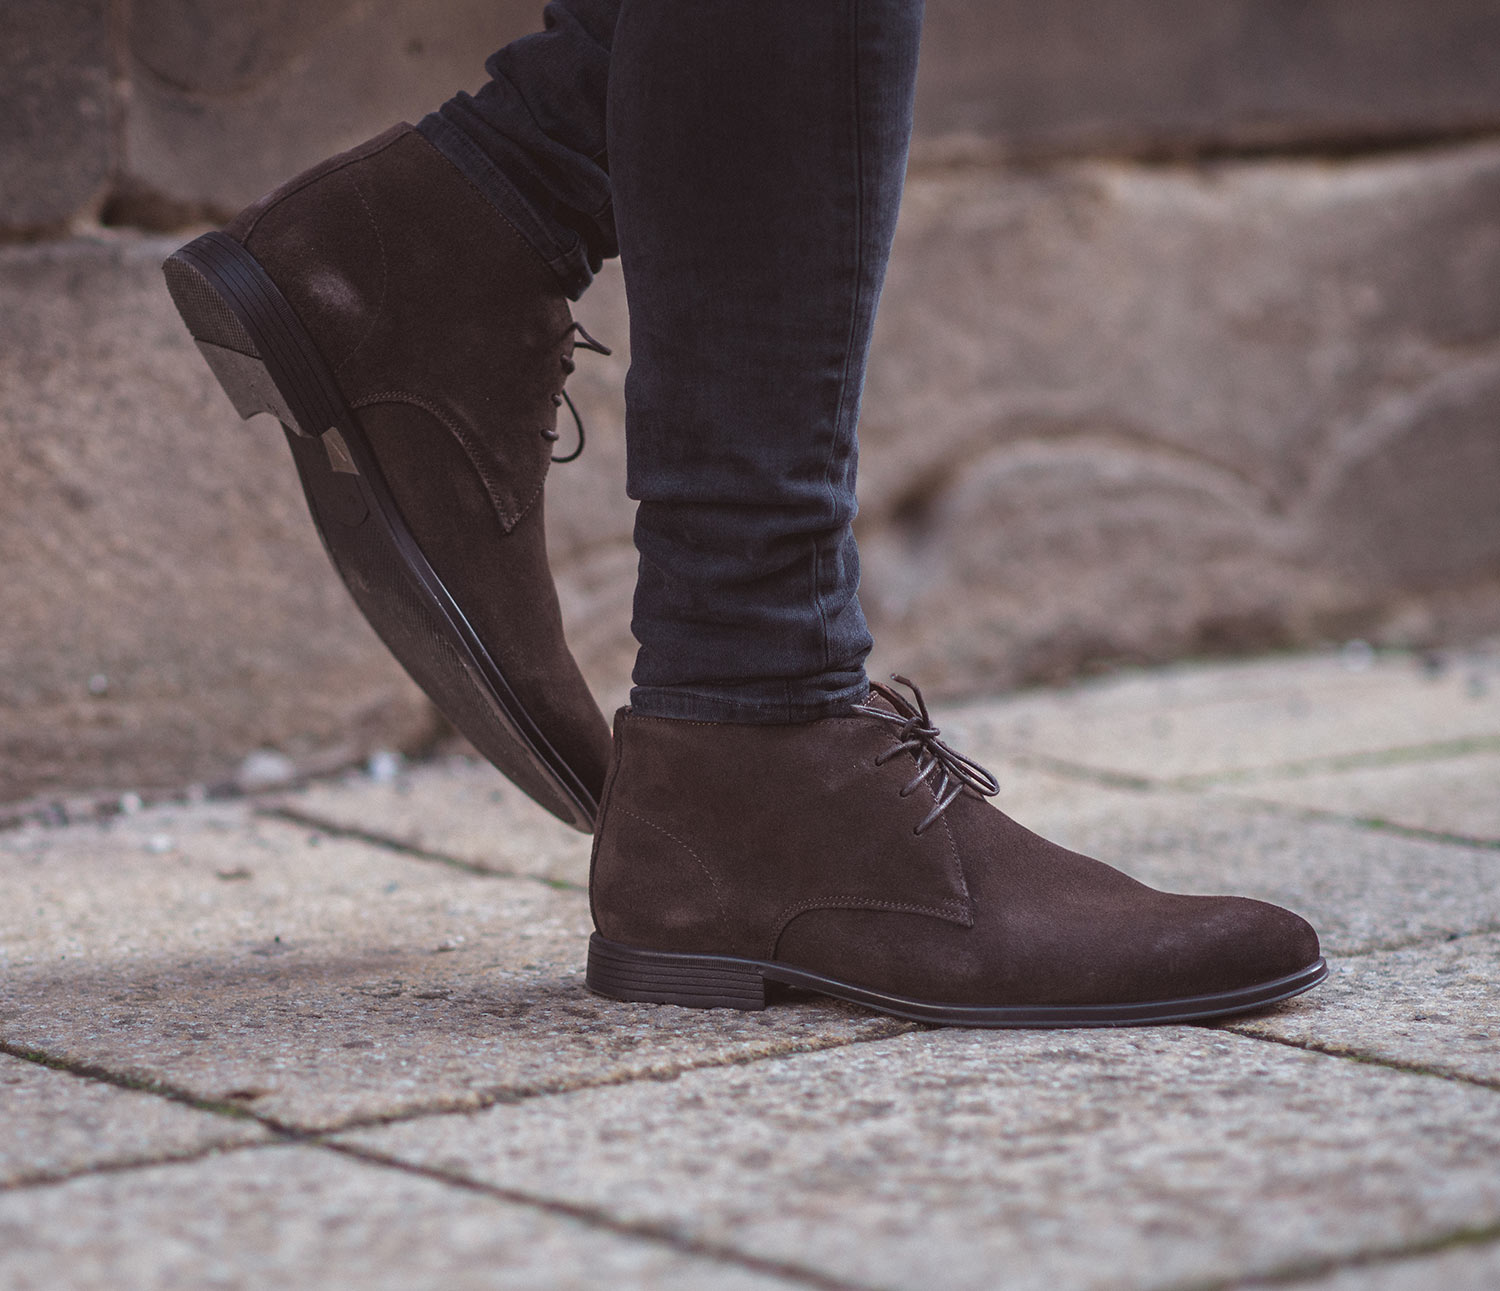 Harry Hern Beeston Chukka Boots Review - Your Average Guy